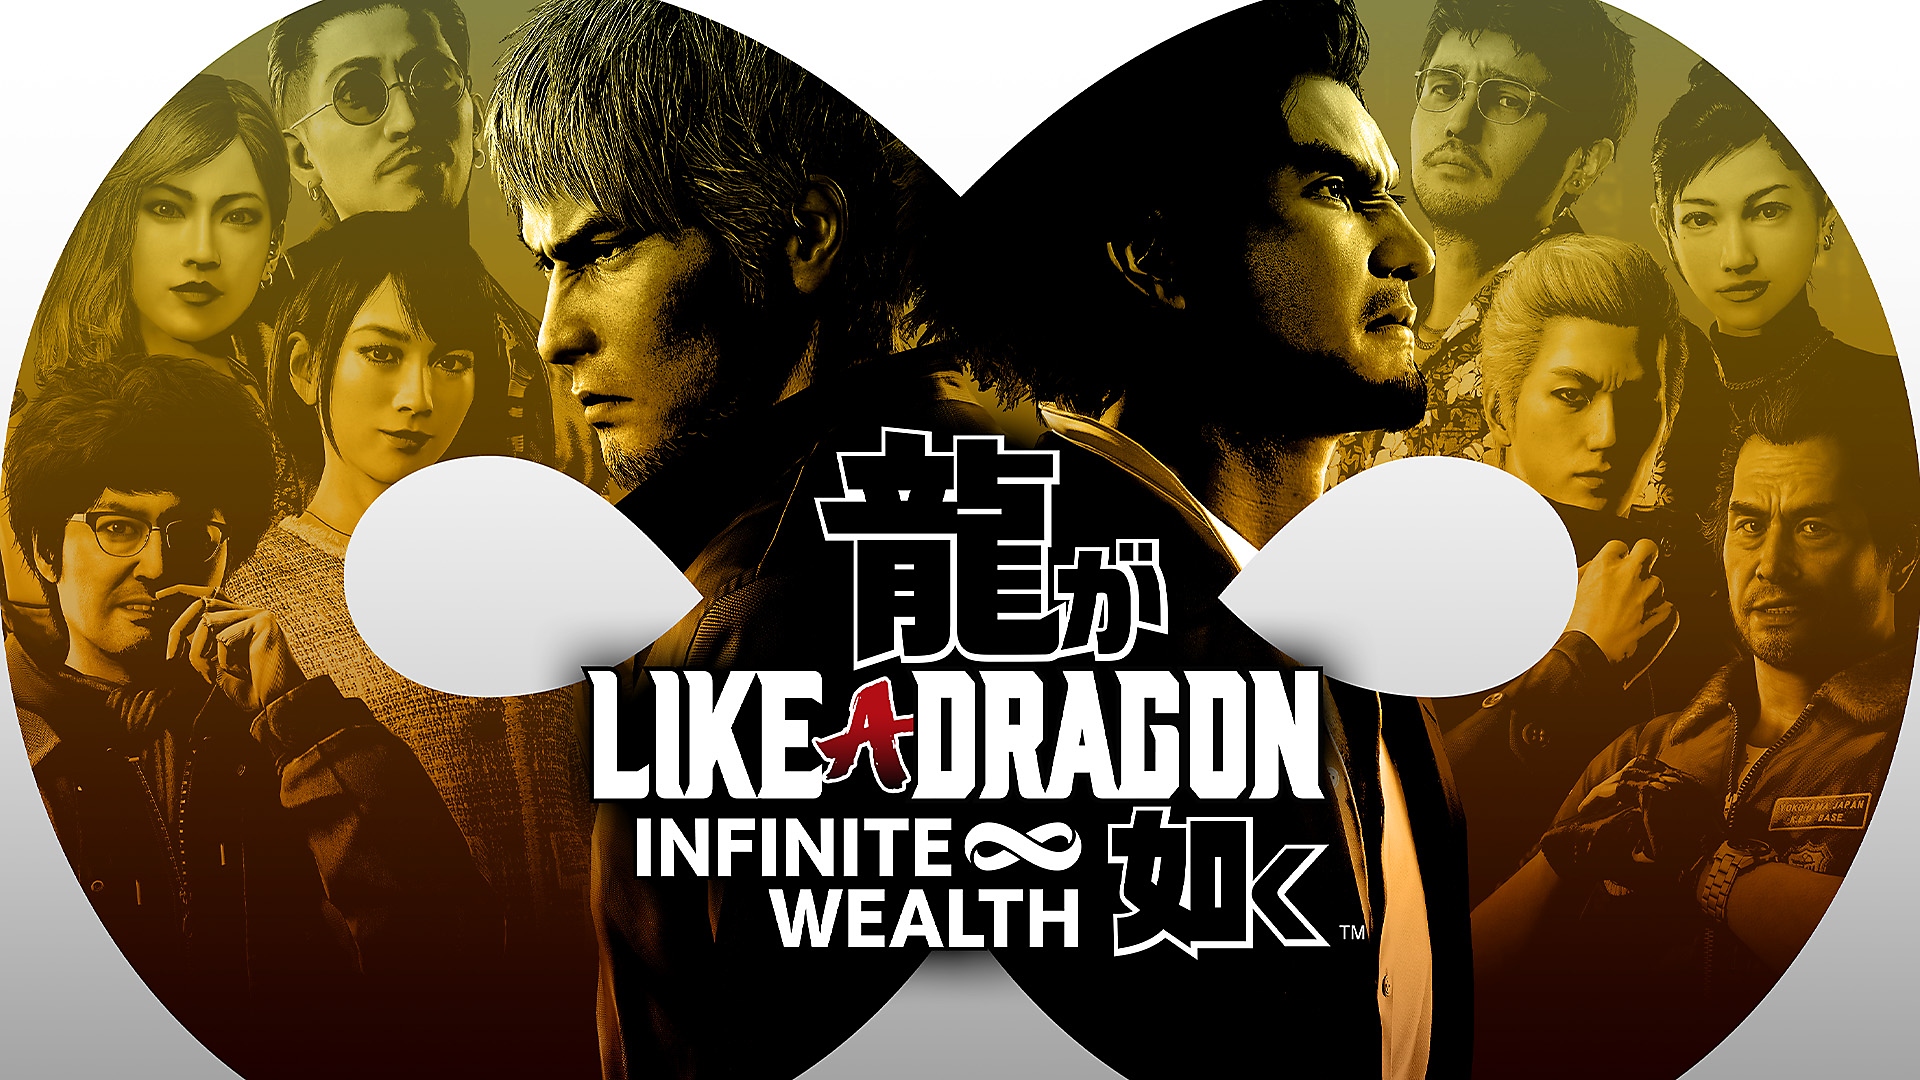 Like a Dragon: Infinite Wealth - English Story Trailer | PS5 & PS4 Games